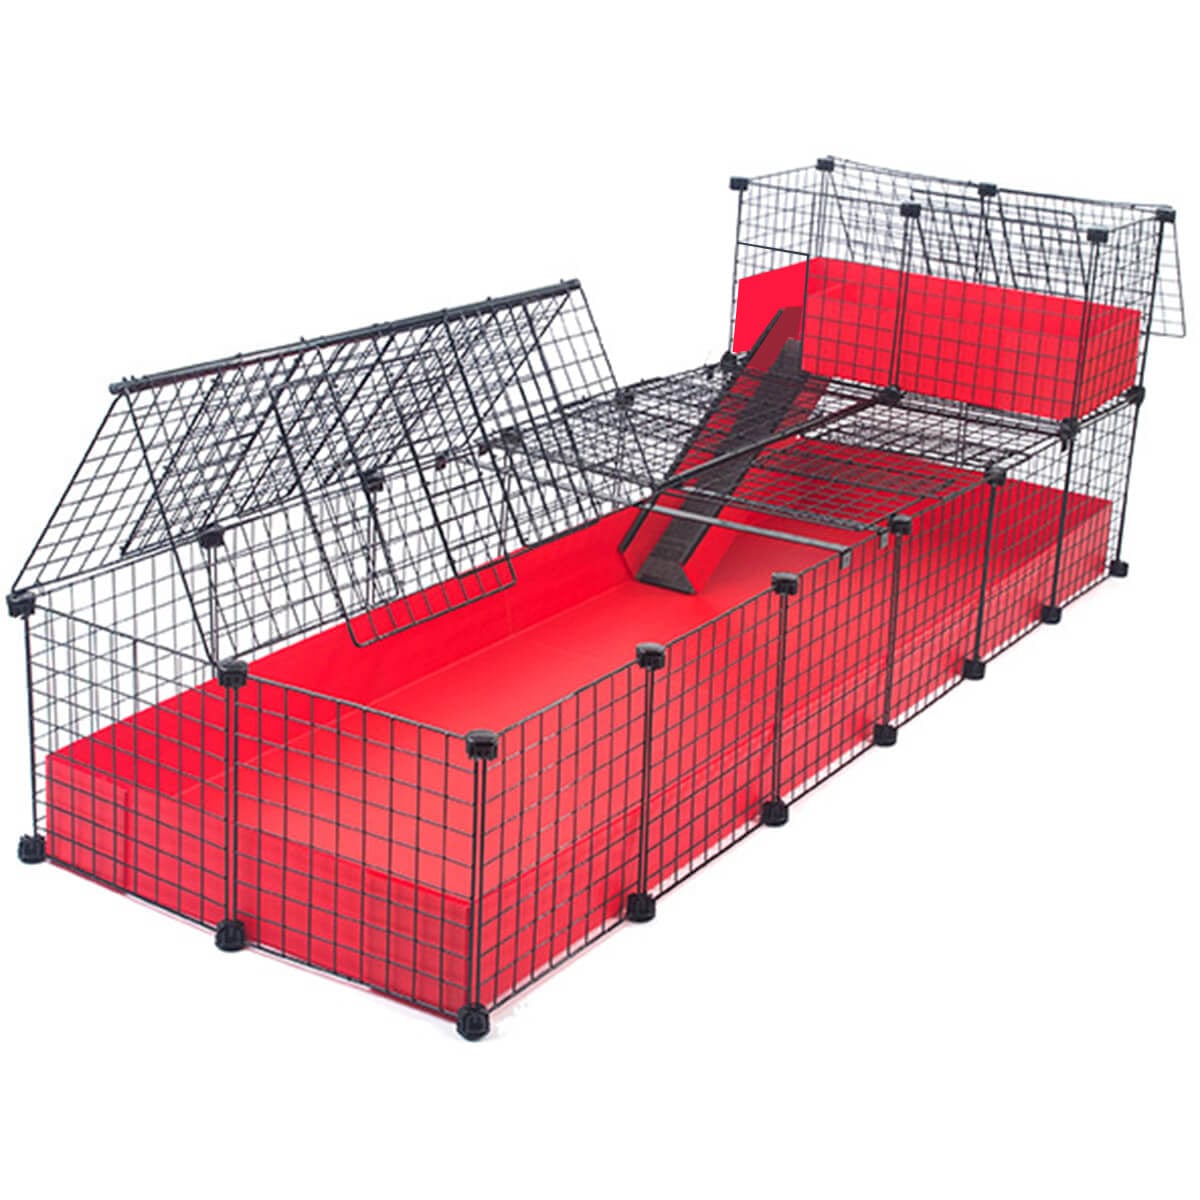 Covered Red Jumbo C&C guinea pig cage with narrow loft and ramp using black grids and connectors